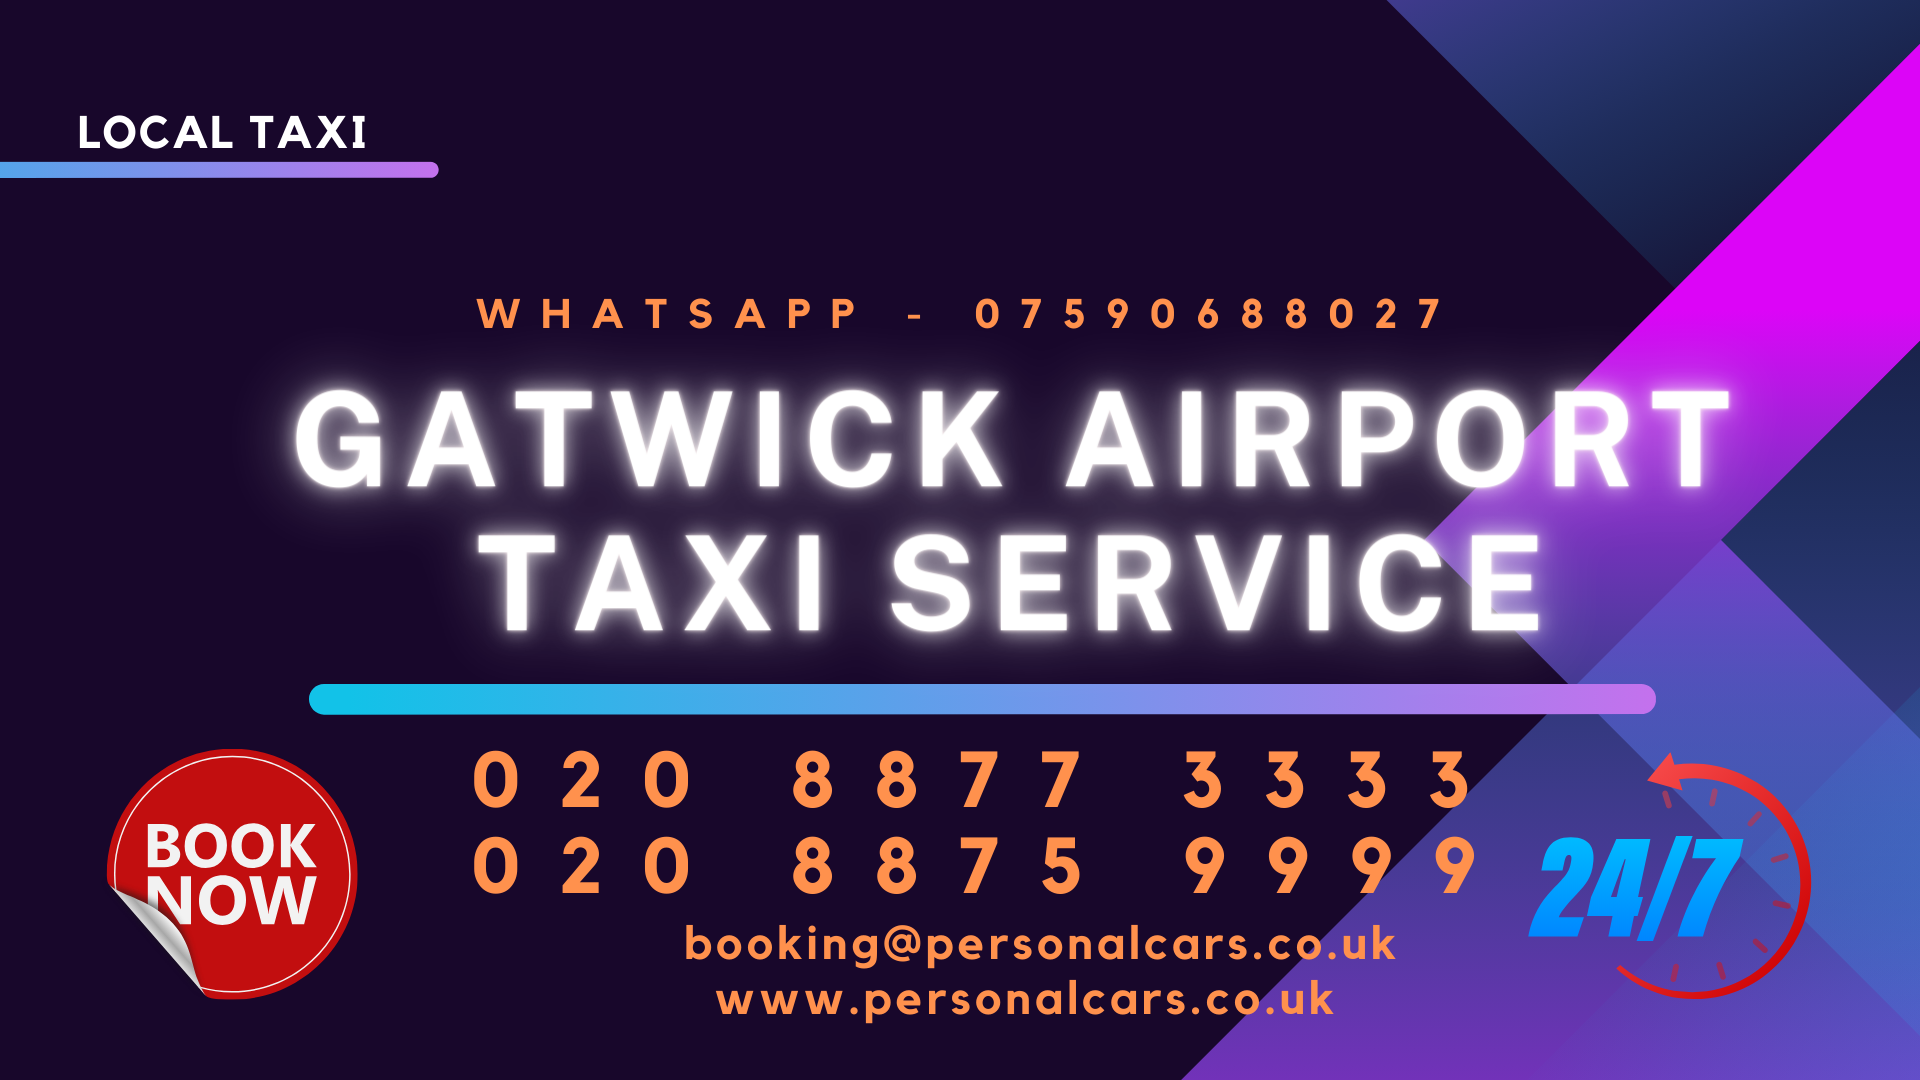 Gatwick airport taxi service